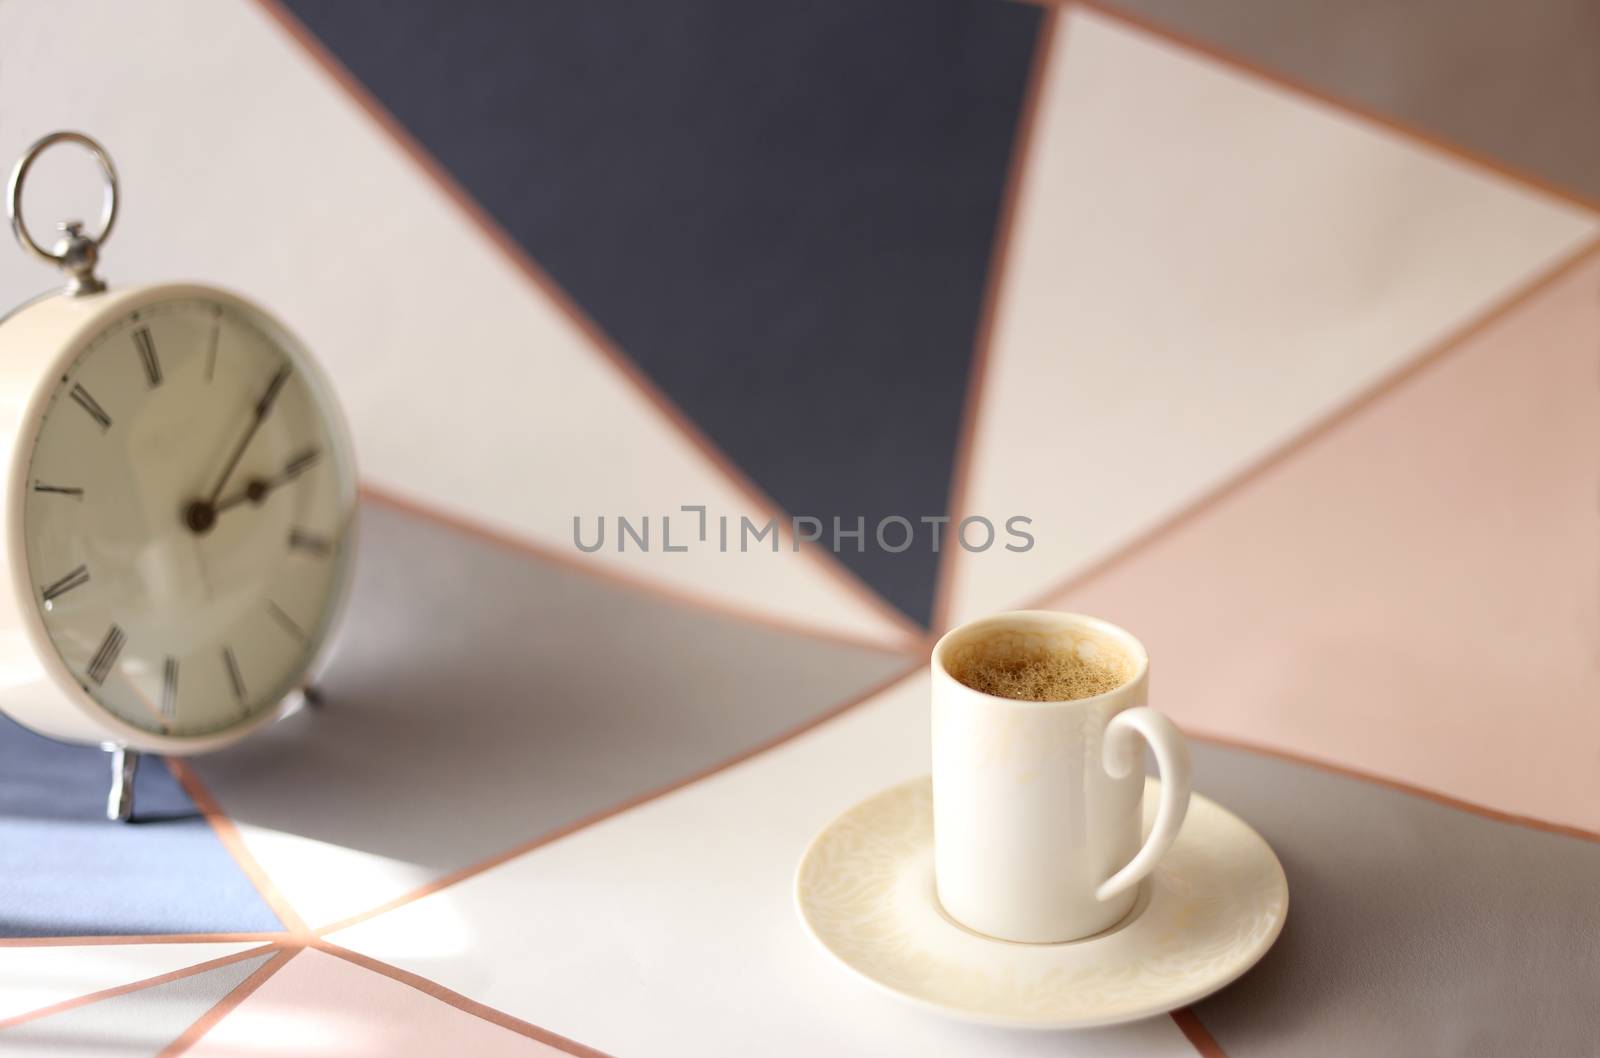 Home office place with stationery, cup of coffee on multicolor background. Home office working station concept